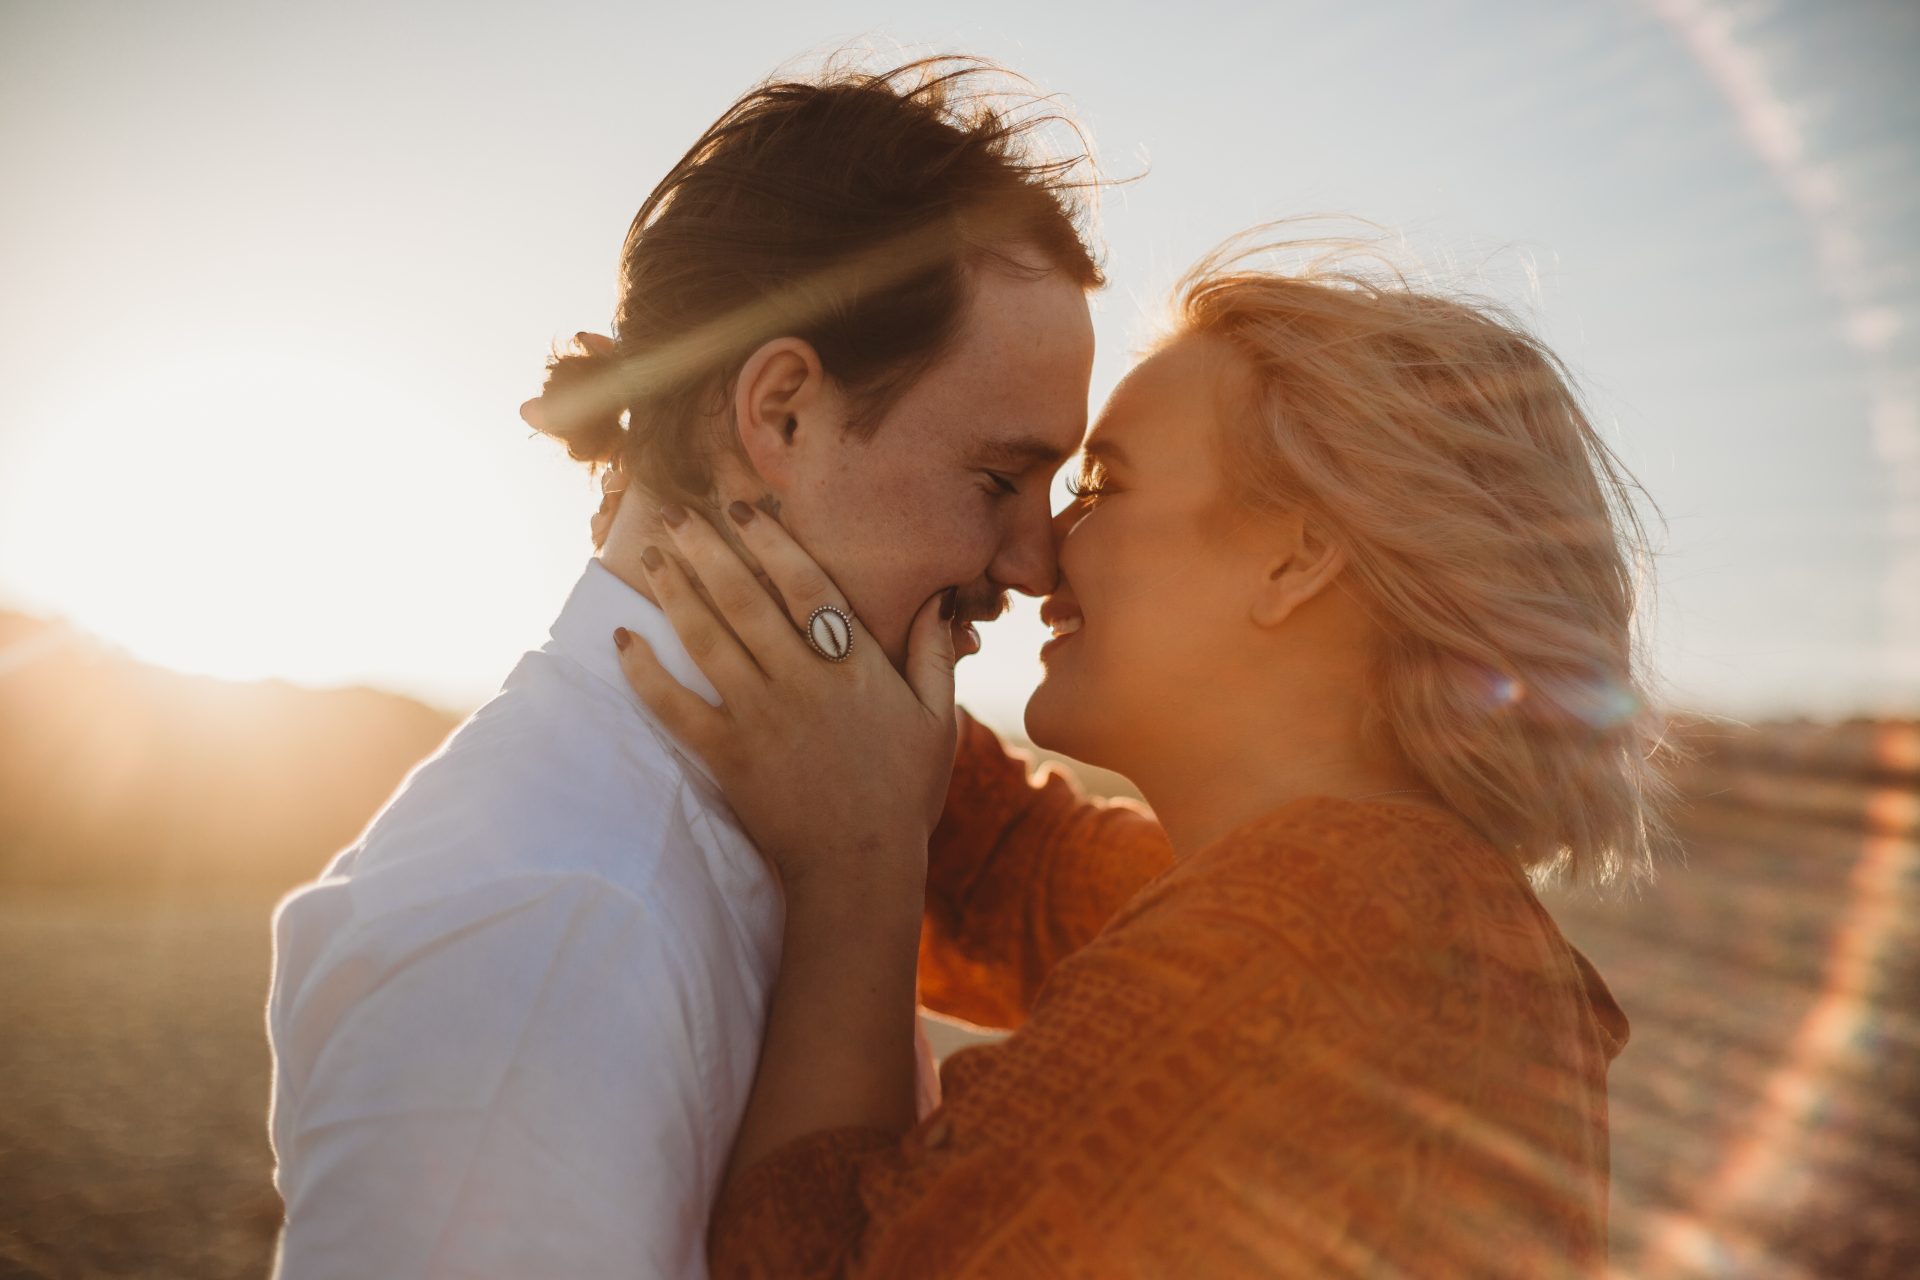 Young couple in an embrace, woman with her hand on her boyfriend's cheek, surrounded by sun flare at sunset